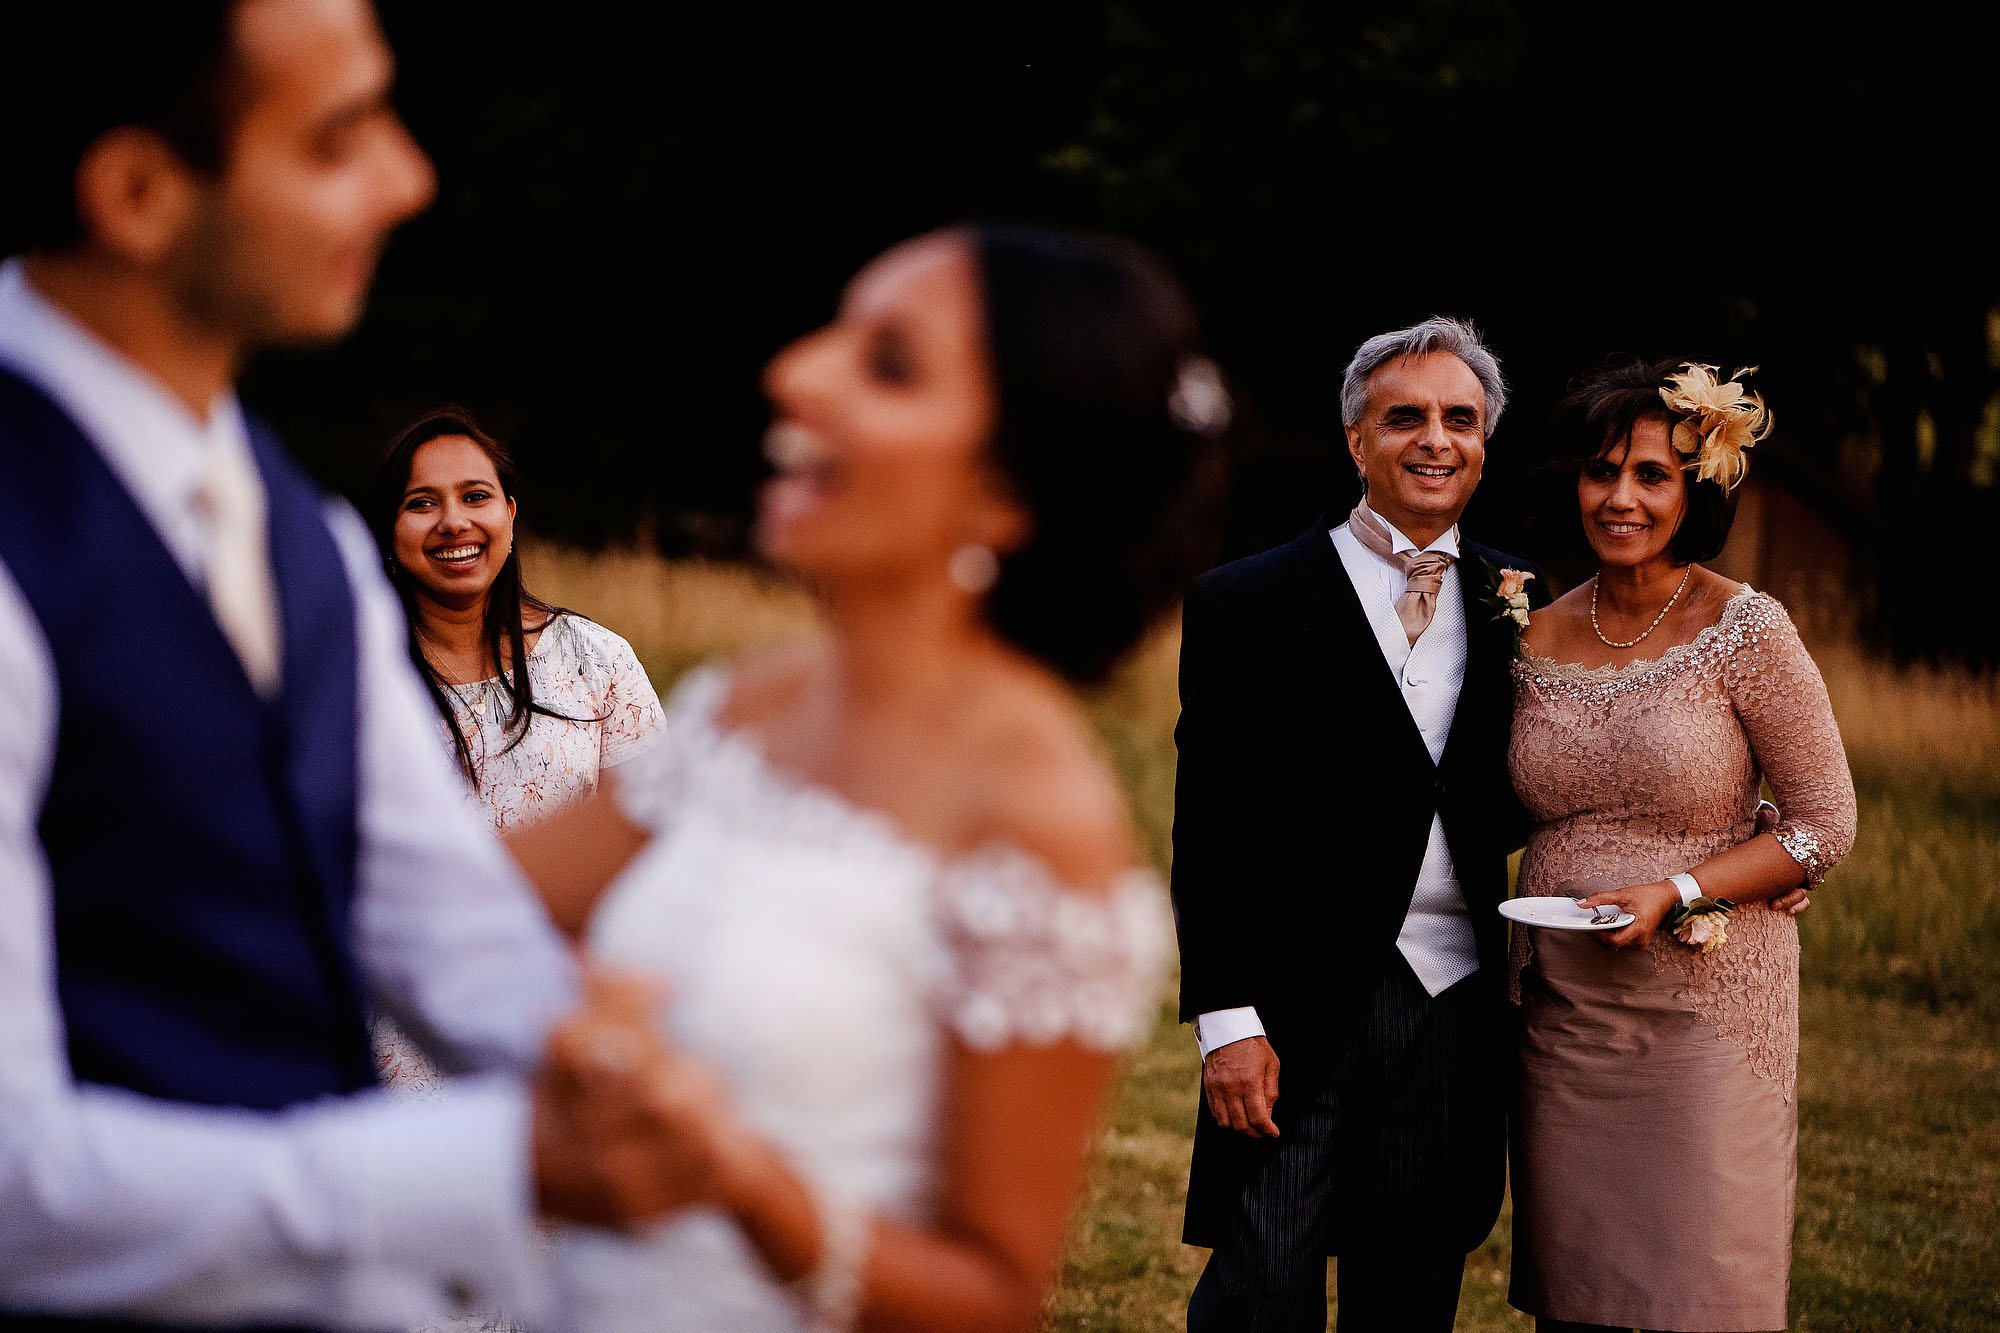 The best wedding photography of 2020 - cheshire wedding photographers arj photography